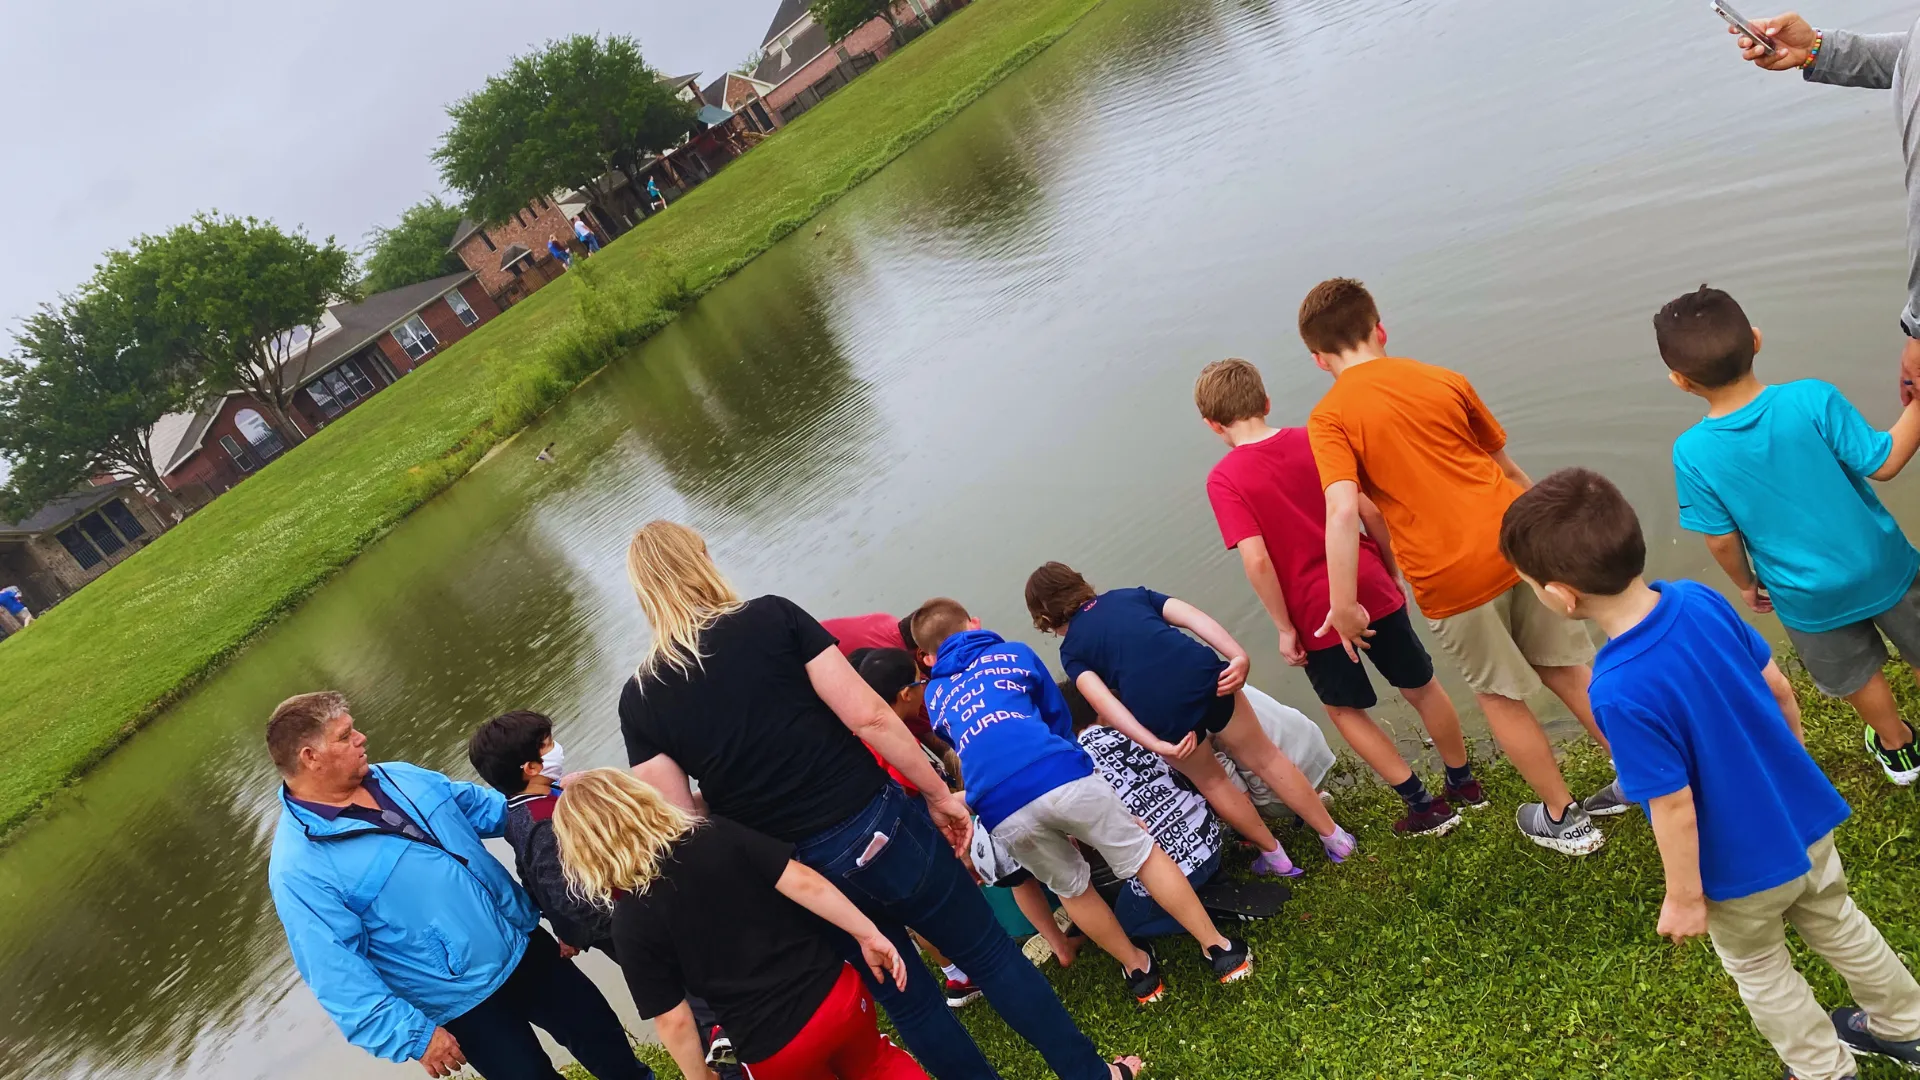 Kids helping with release of fish at neighborhood pond fish delivery